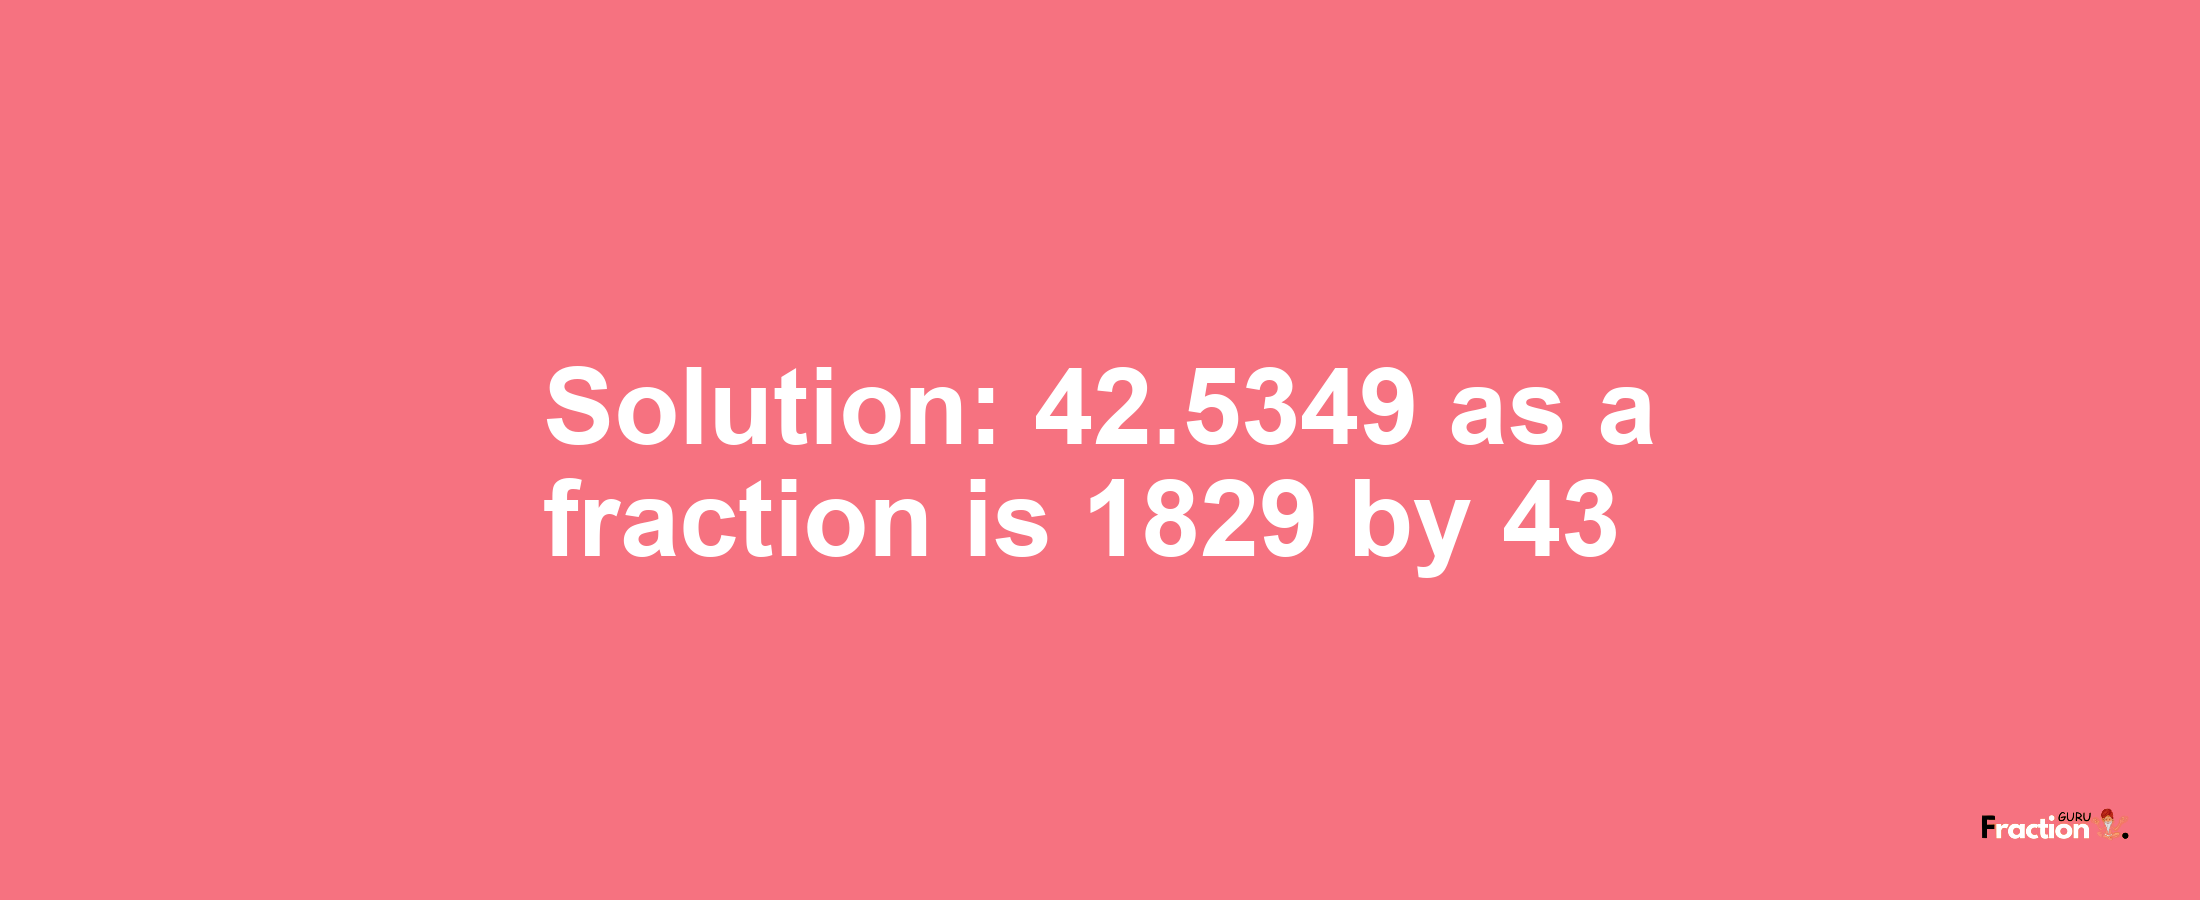 Solution:42.5349 as a fraction is 1829/43